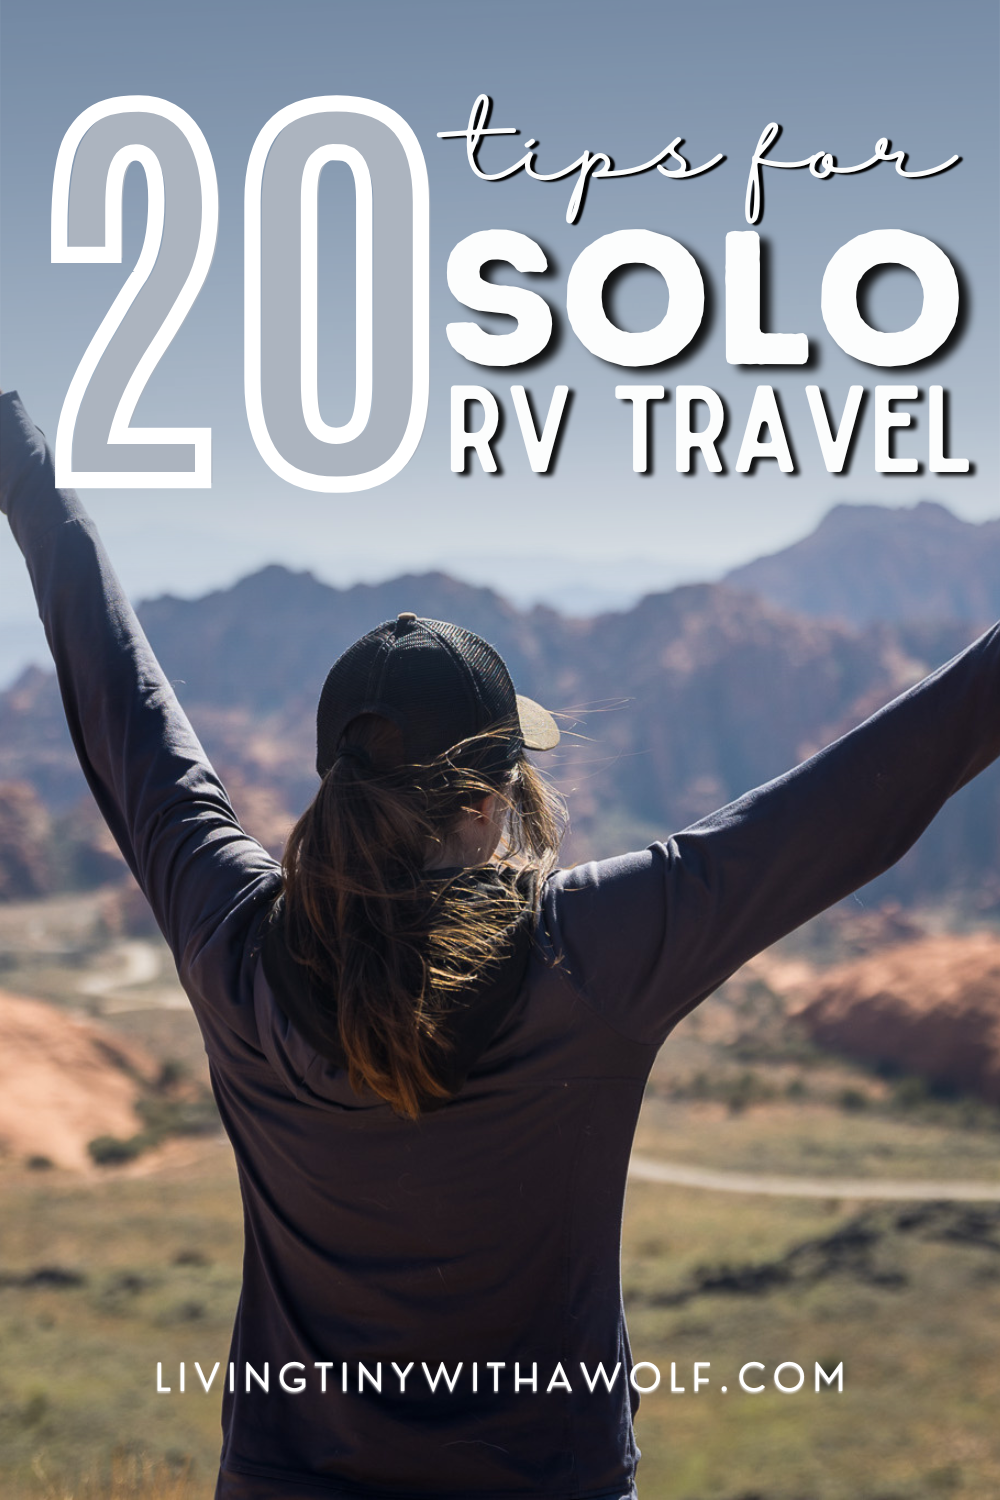 20 Safety Tips for Solo RV Travel (Full-Time)